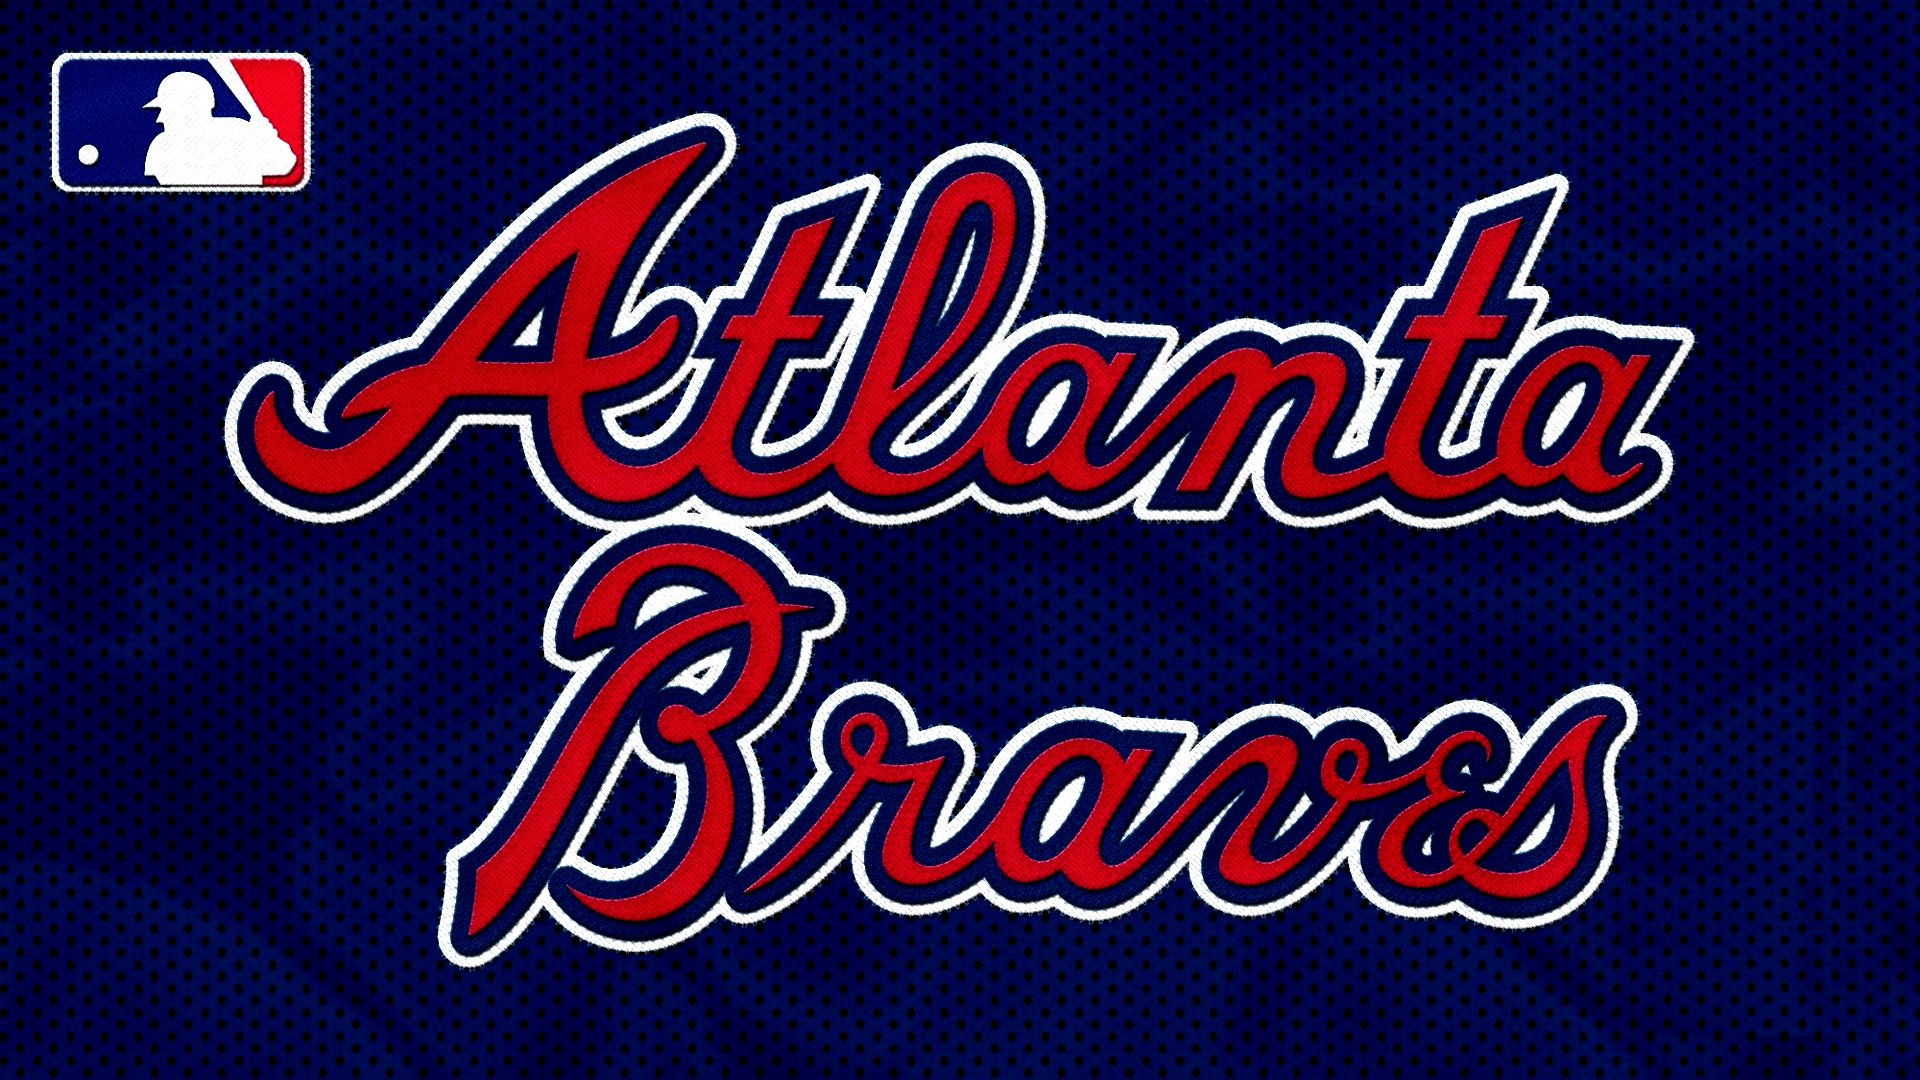 Wallpaper Desktop Atlanta Braves HD with high-resolution 1920x1080 pixel. You can use this wallpaper for Mac Desktop Wallpaper, Laptop Screensavers, Android Wallpapers, Tablet or iPhone Home Screen and another mobile phone device